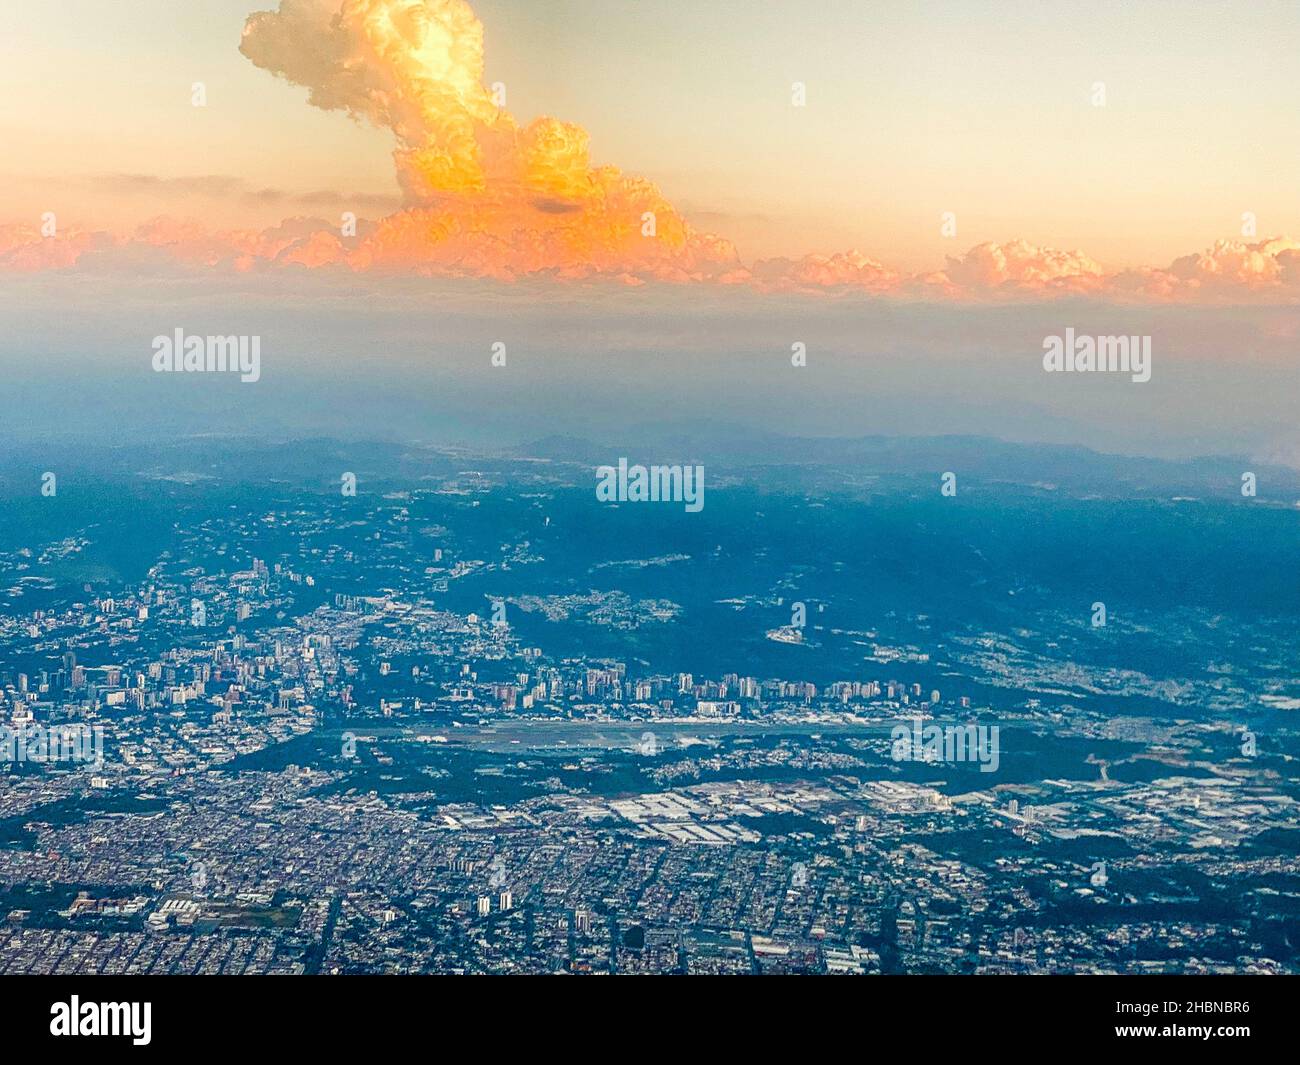 An aerial view of Guatemala City at sunset Stock Photo